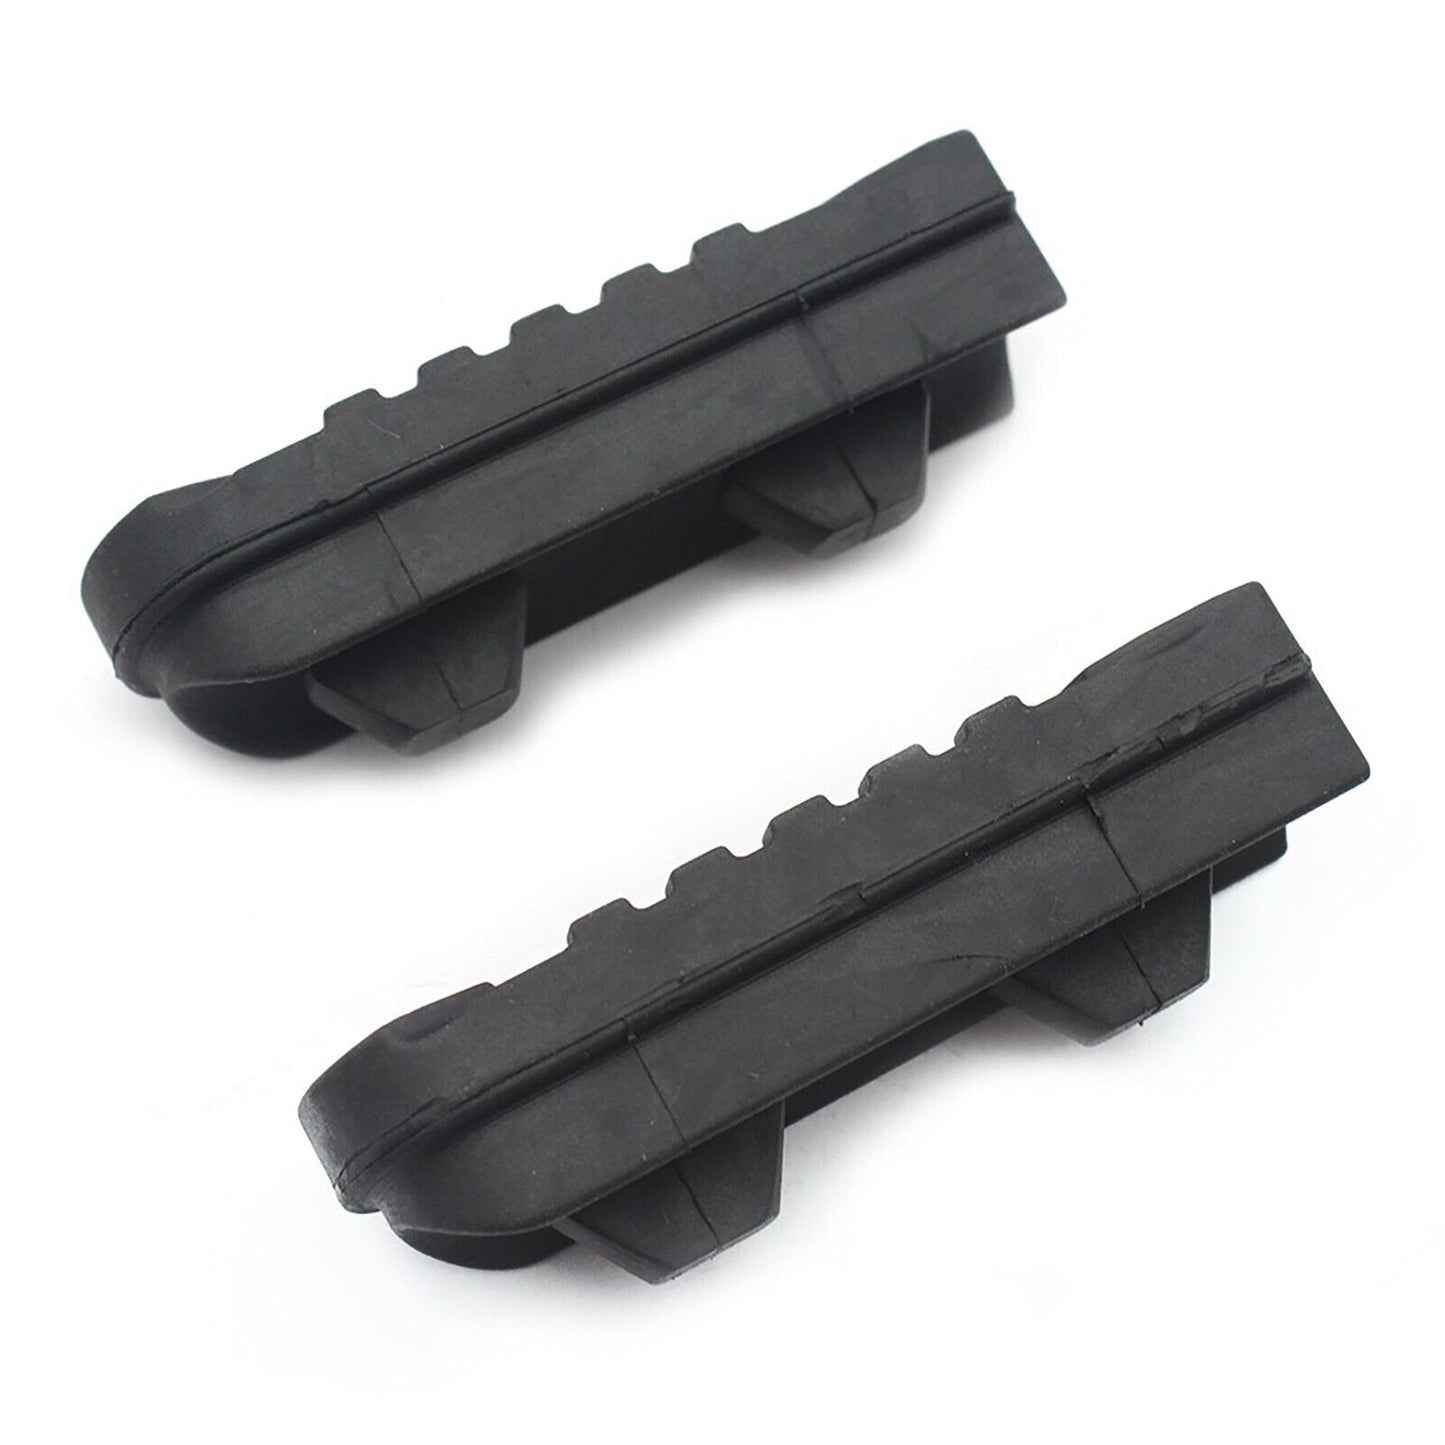 2pcs Motorcycle Front Rubber Foot Pegs Pedal Footrest for BMW S1000XR R1250GS R nine T F850GS F750GS